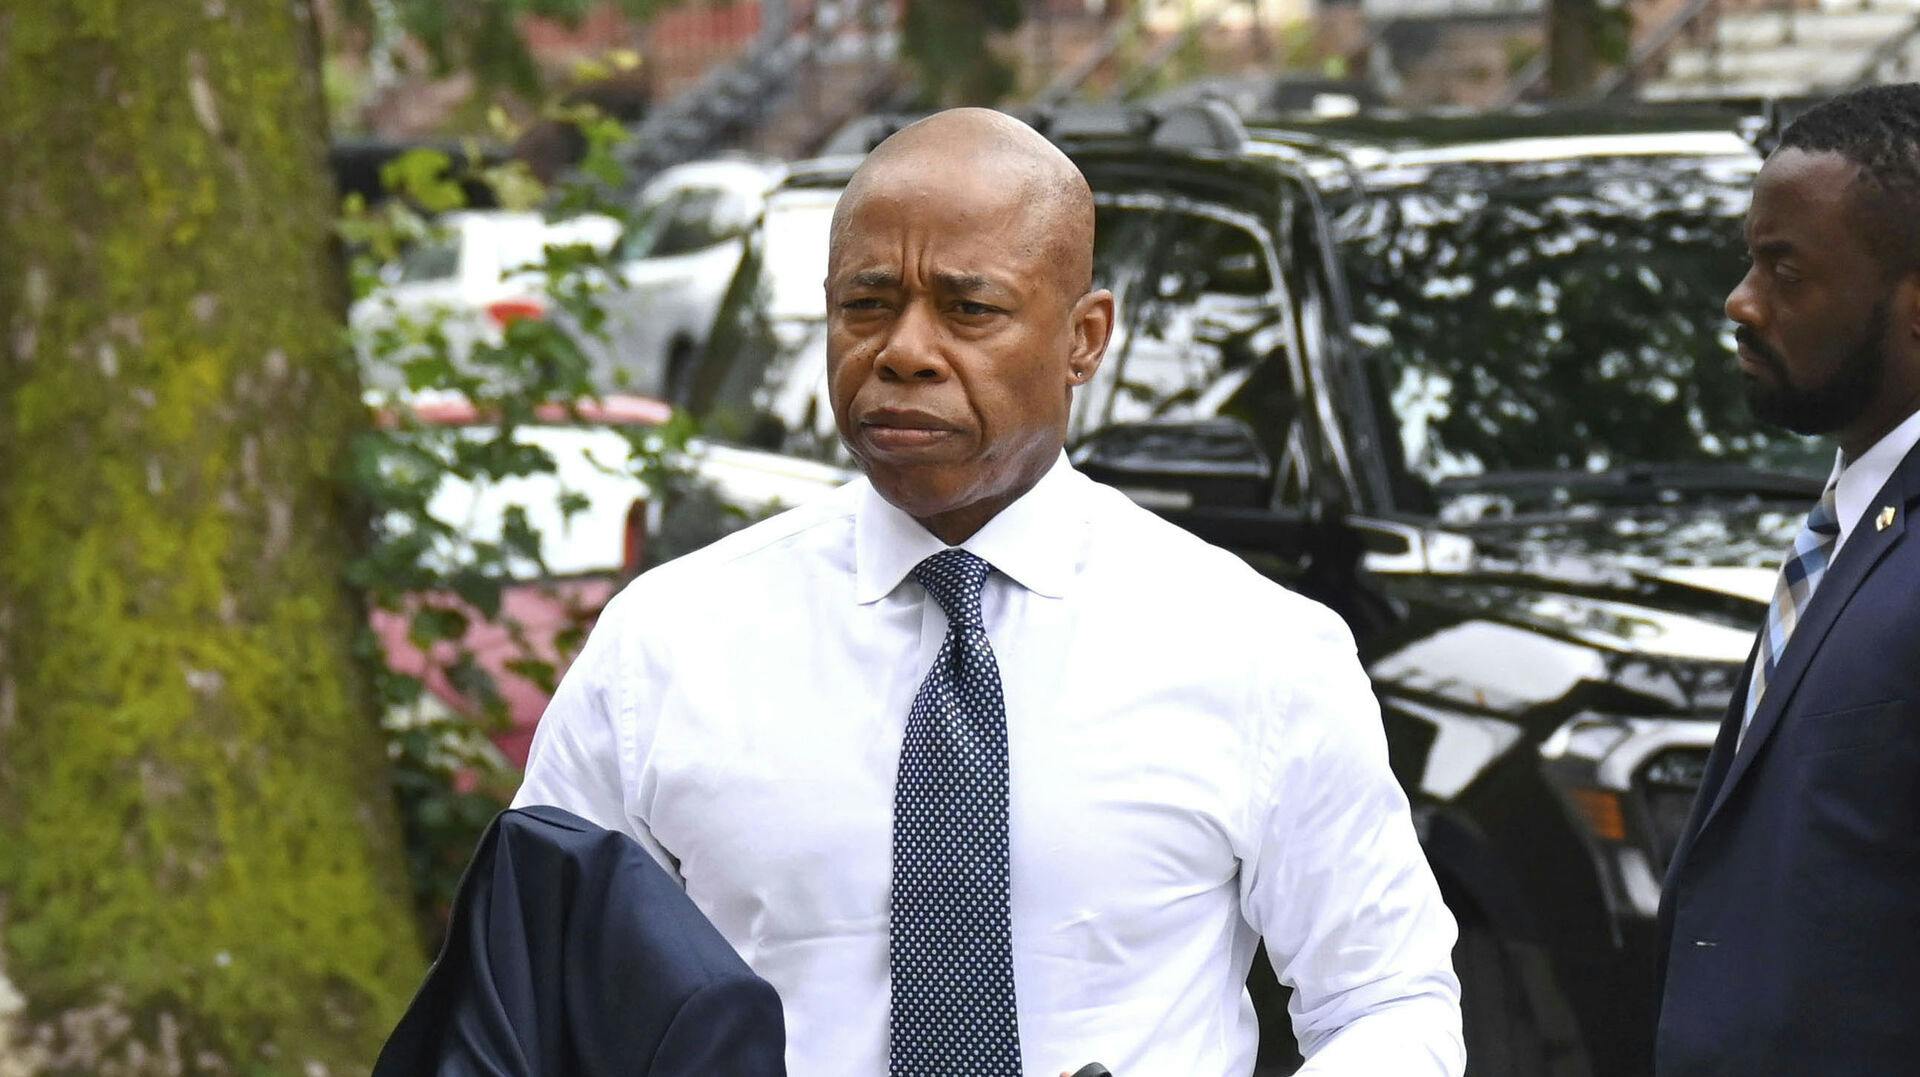 Photo by: zz/NDZ/STAR MAX/IPx 2023 6/27/23 Mayor of New York City Eric Adams is seen on June 27, 2023 arriving at P.S. 005 Dr. Ronald McNair public school in Brooklyn to deliver remarks concerning mental health and education. (NYC)